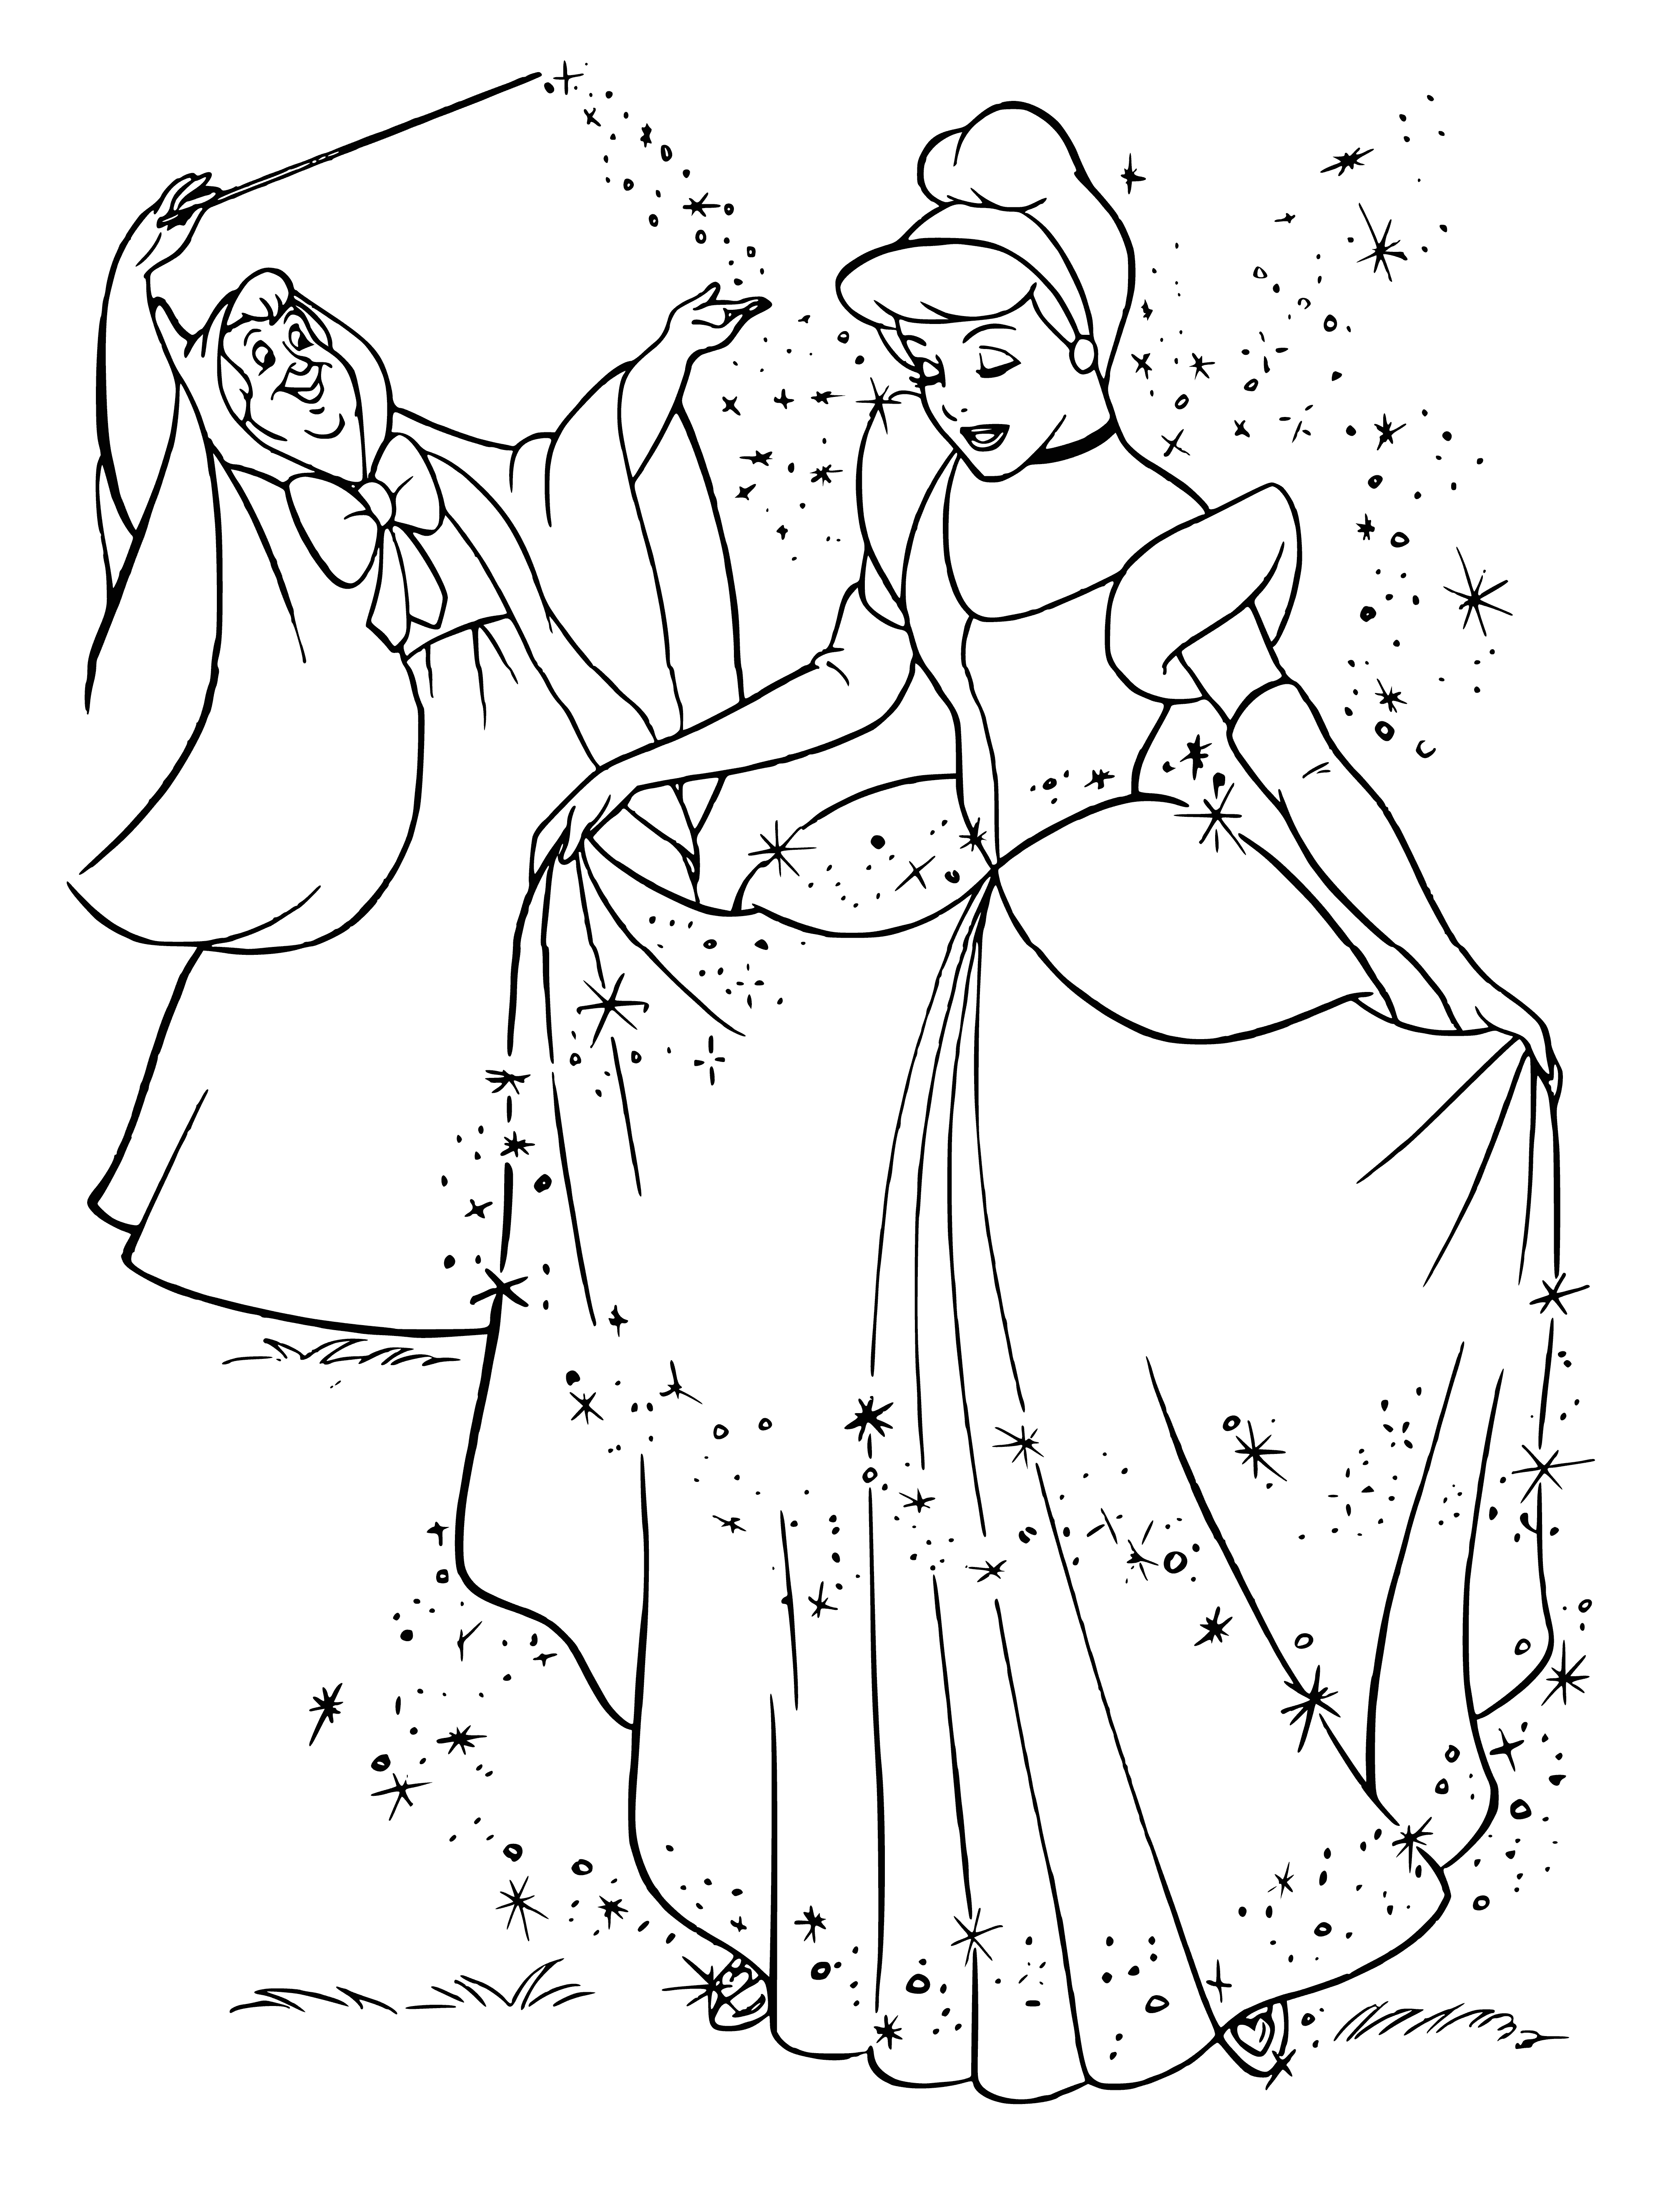 coloring page: Cinderella kneels as her Fairy Godmother waves a wand, transforming her into a princess with new dress, shoes, and jewelry.